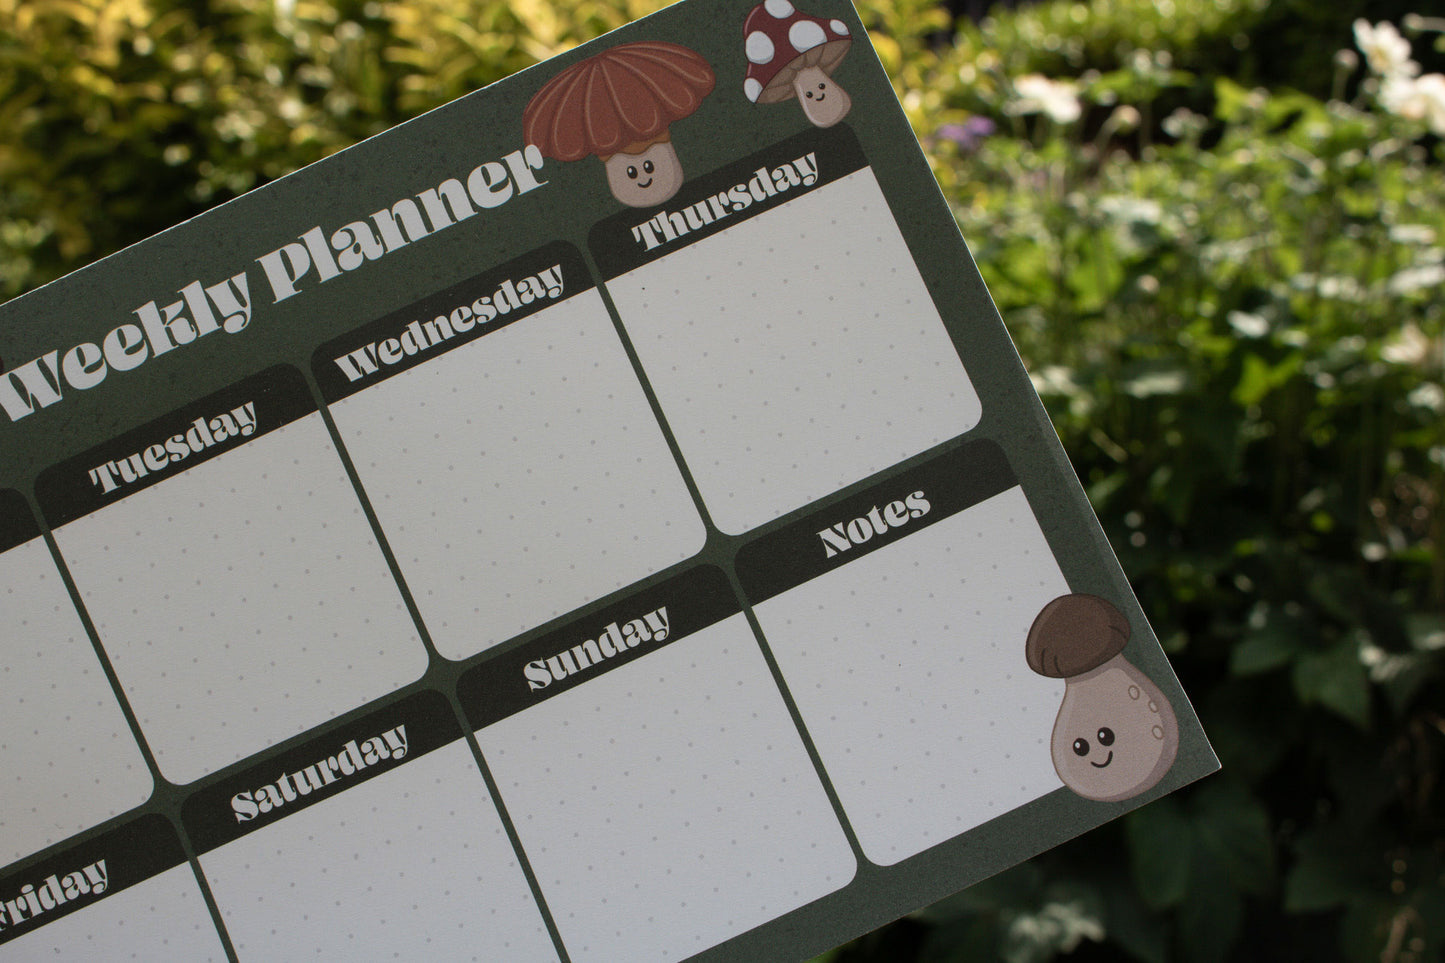 A5 Weekly Planner Pad with Mushroom Design by Mellow Apricot Studio - close up on mushroom